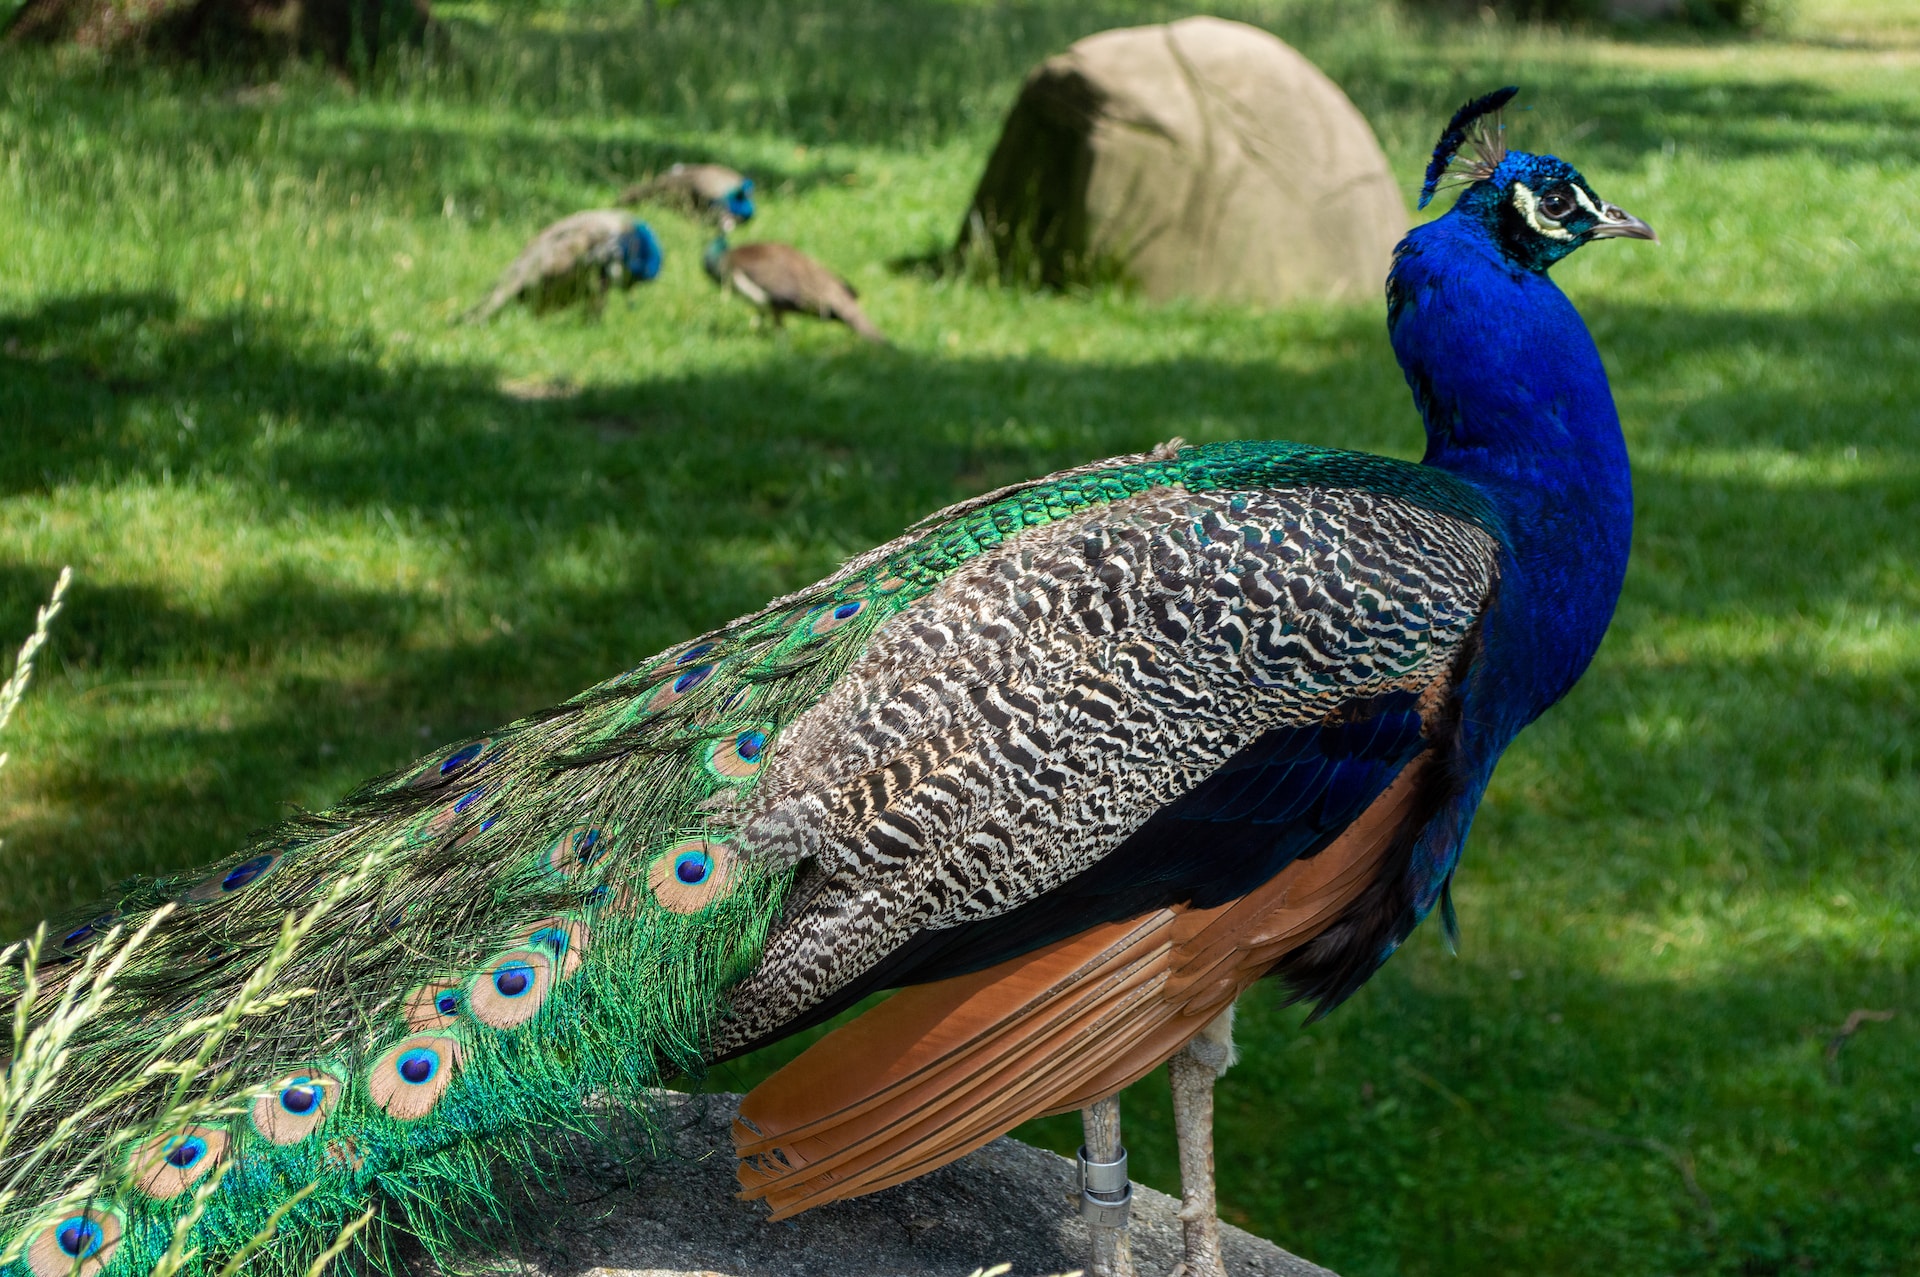 A peacock in the Detroit Zoo.